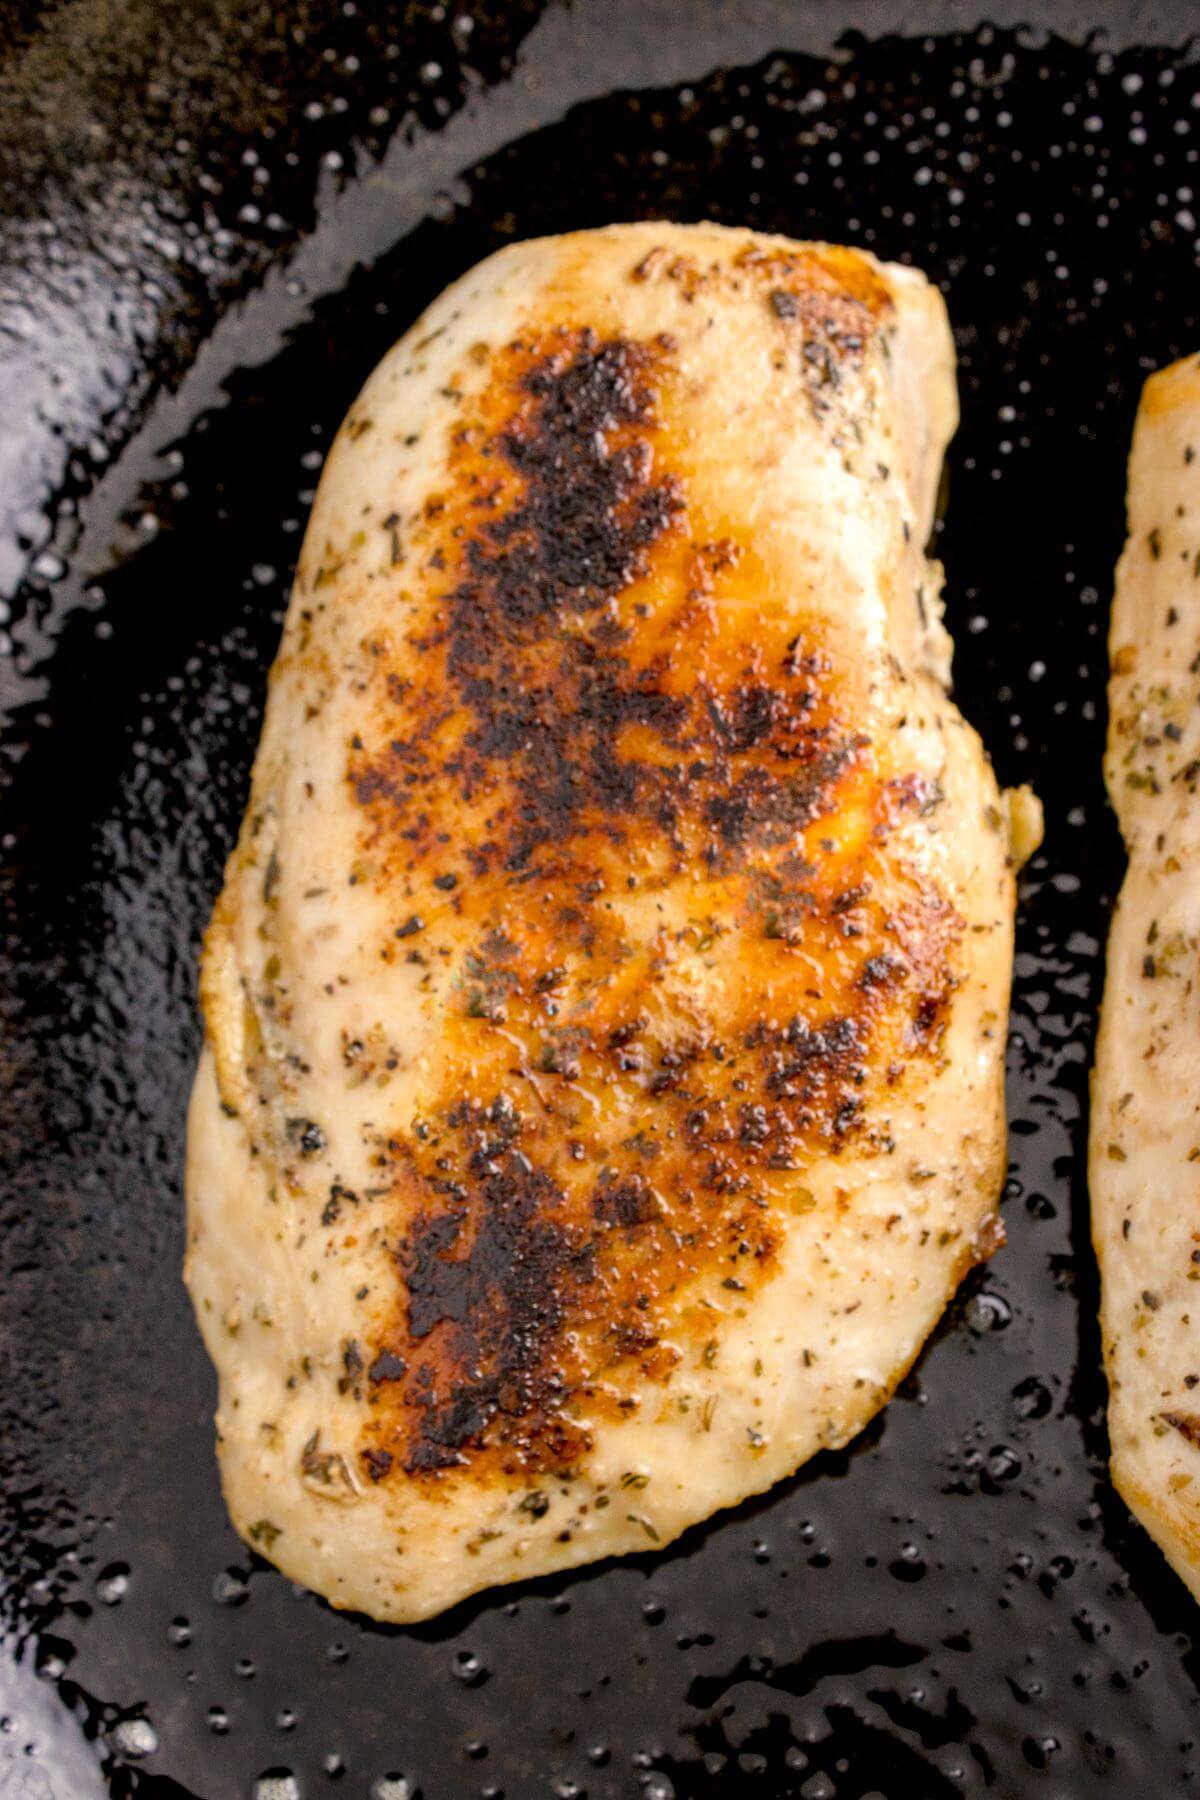 A blackened sear shows on a chicken breast in pan.